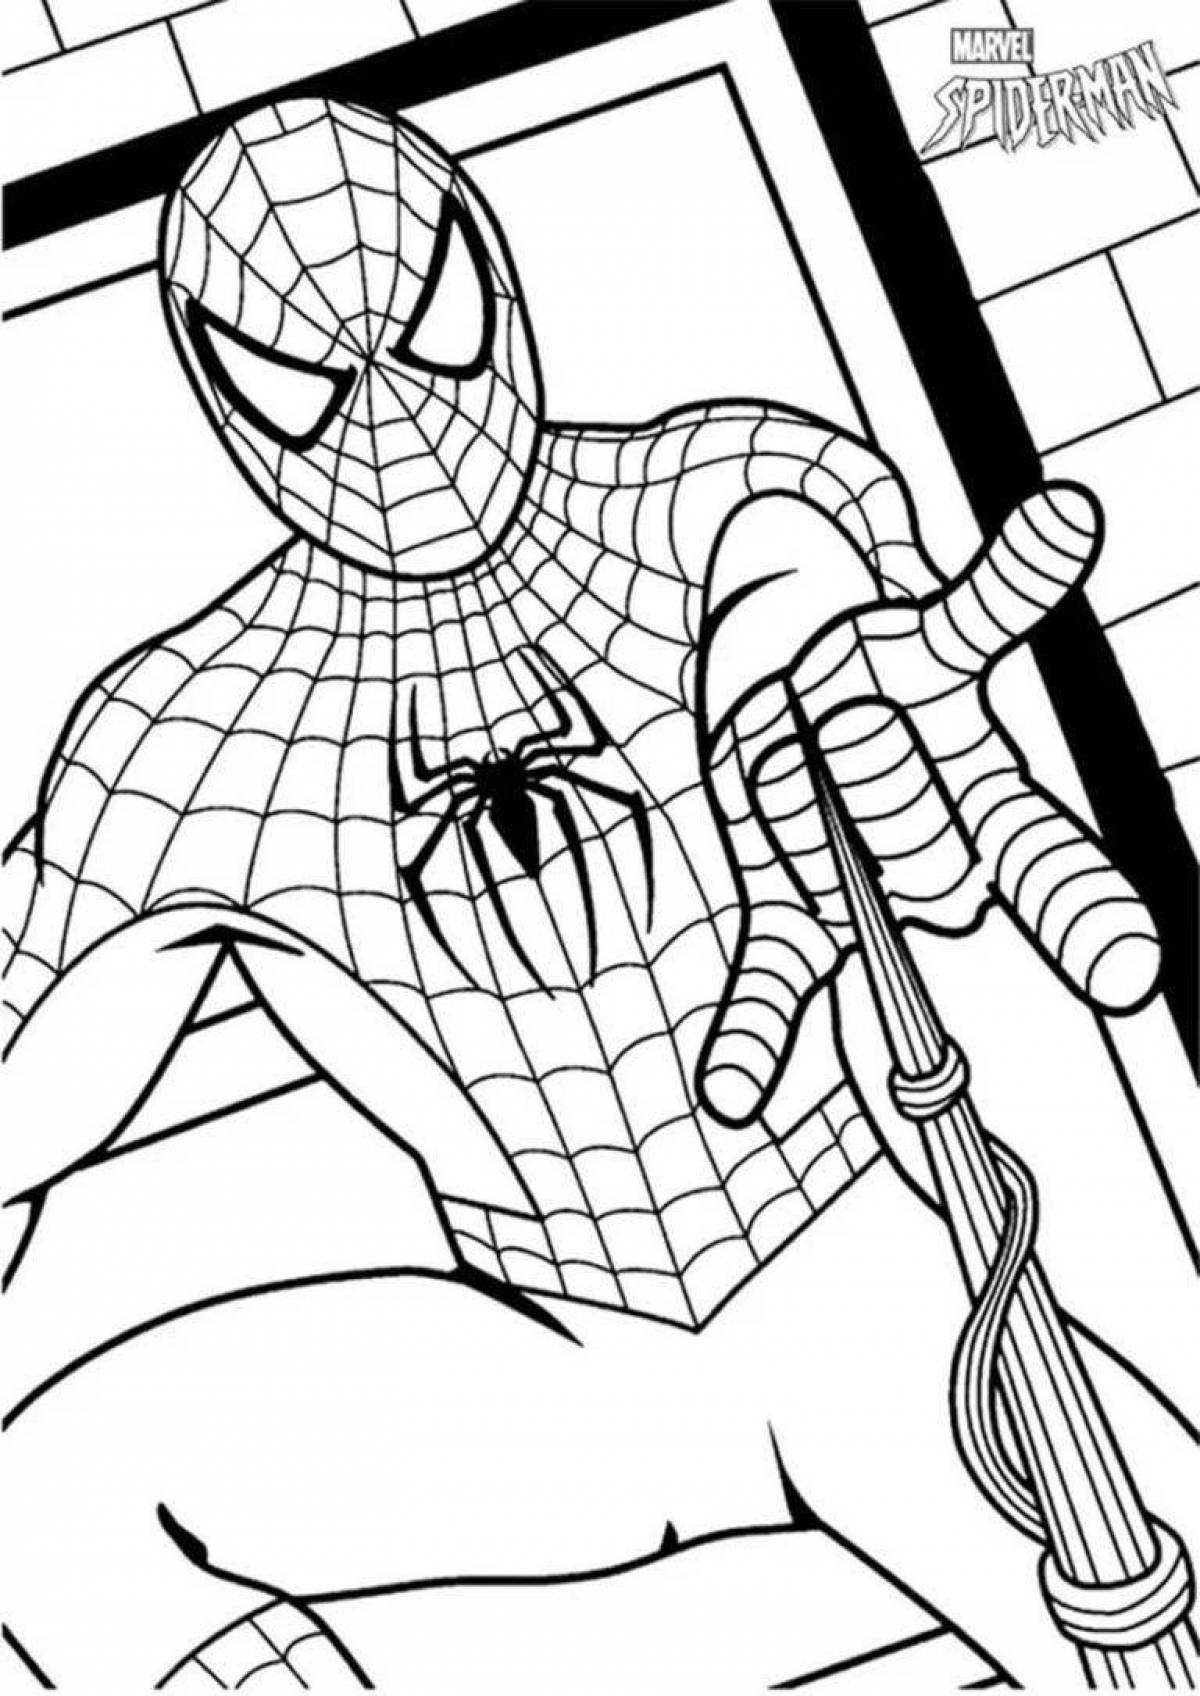 Adorable spiderman coloring page for kids